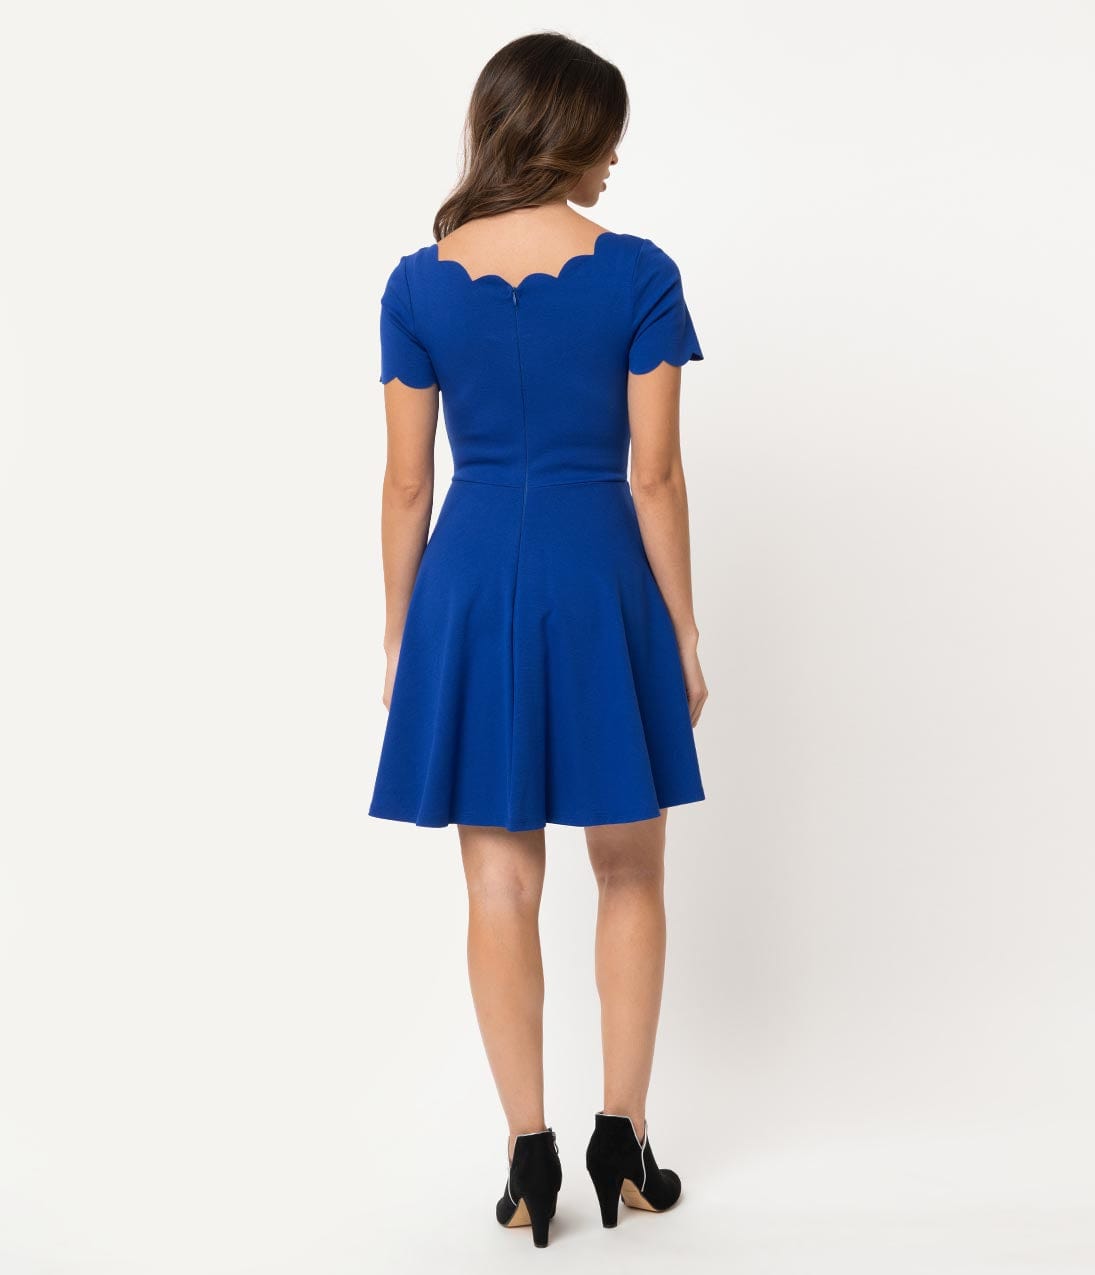 Smak Parlour Royal Blue Stretch Scalloped Short Sleeve Charmed Fit & Flare Dress